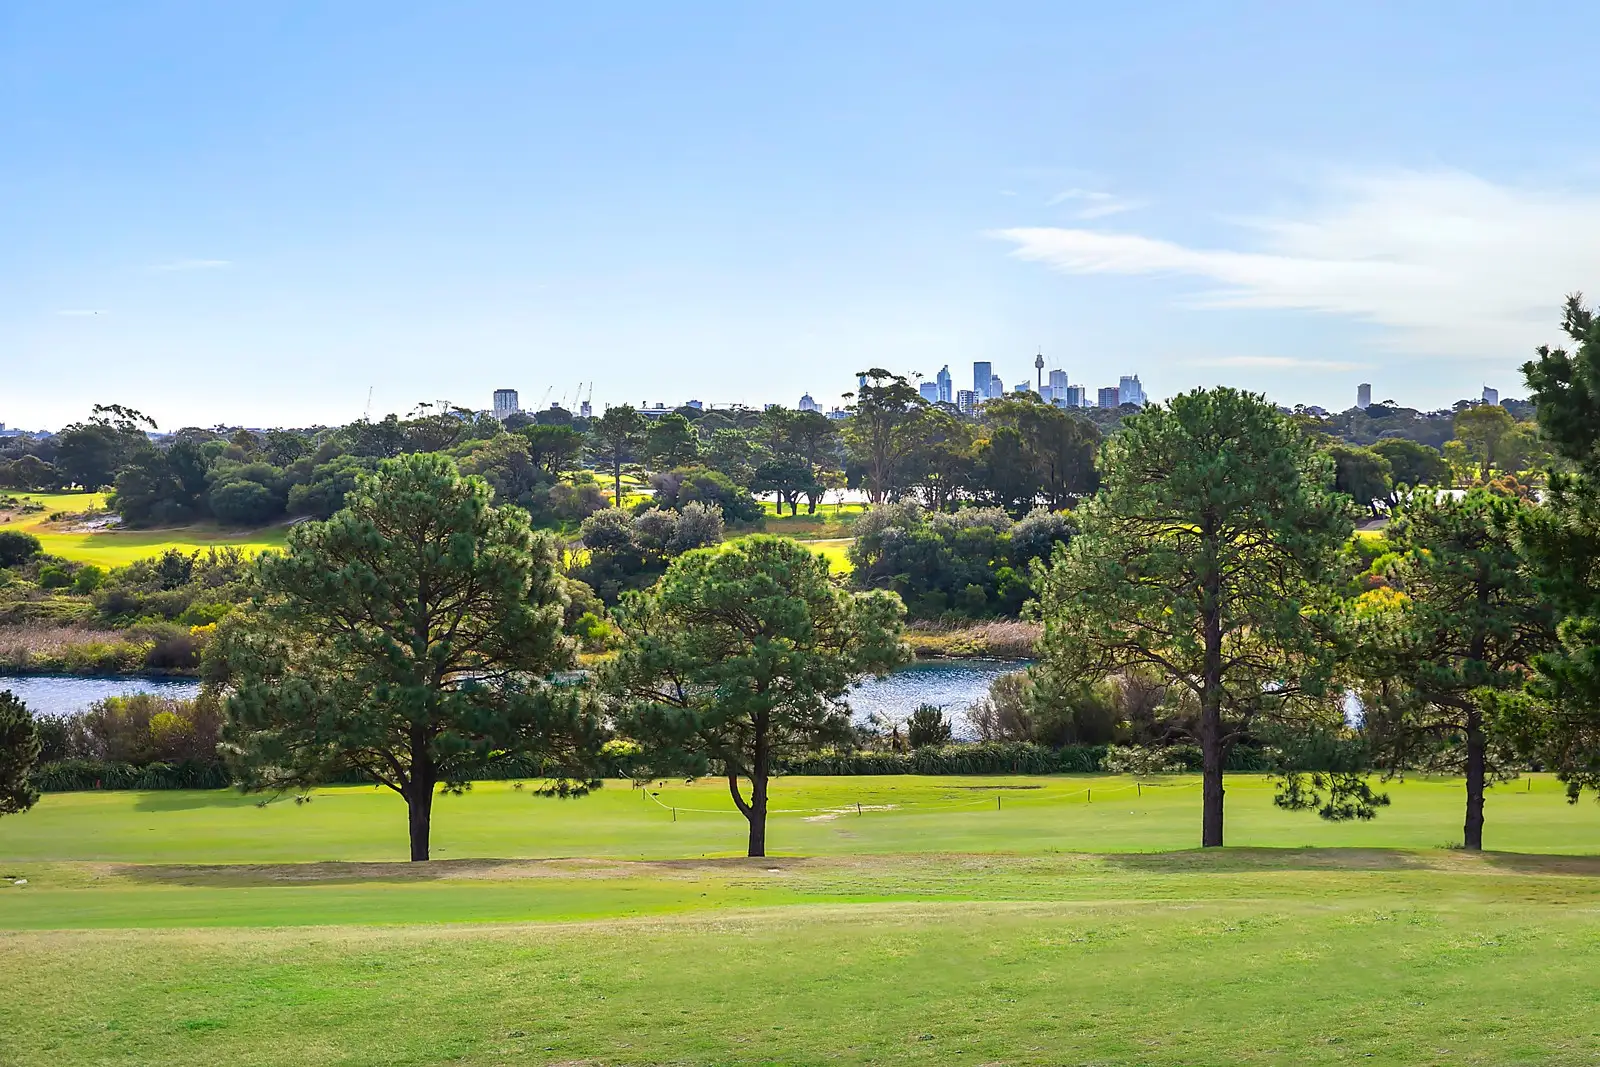 Photo #2: 1 Macarthur Avenue, Pagewood - Sold by Sydney Sotheby's International Realty